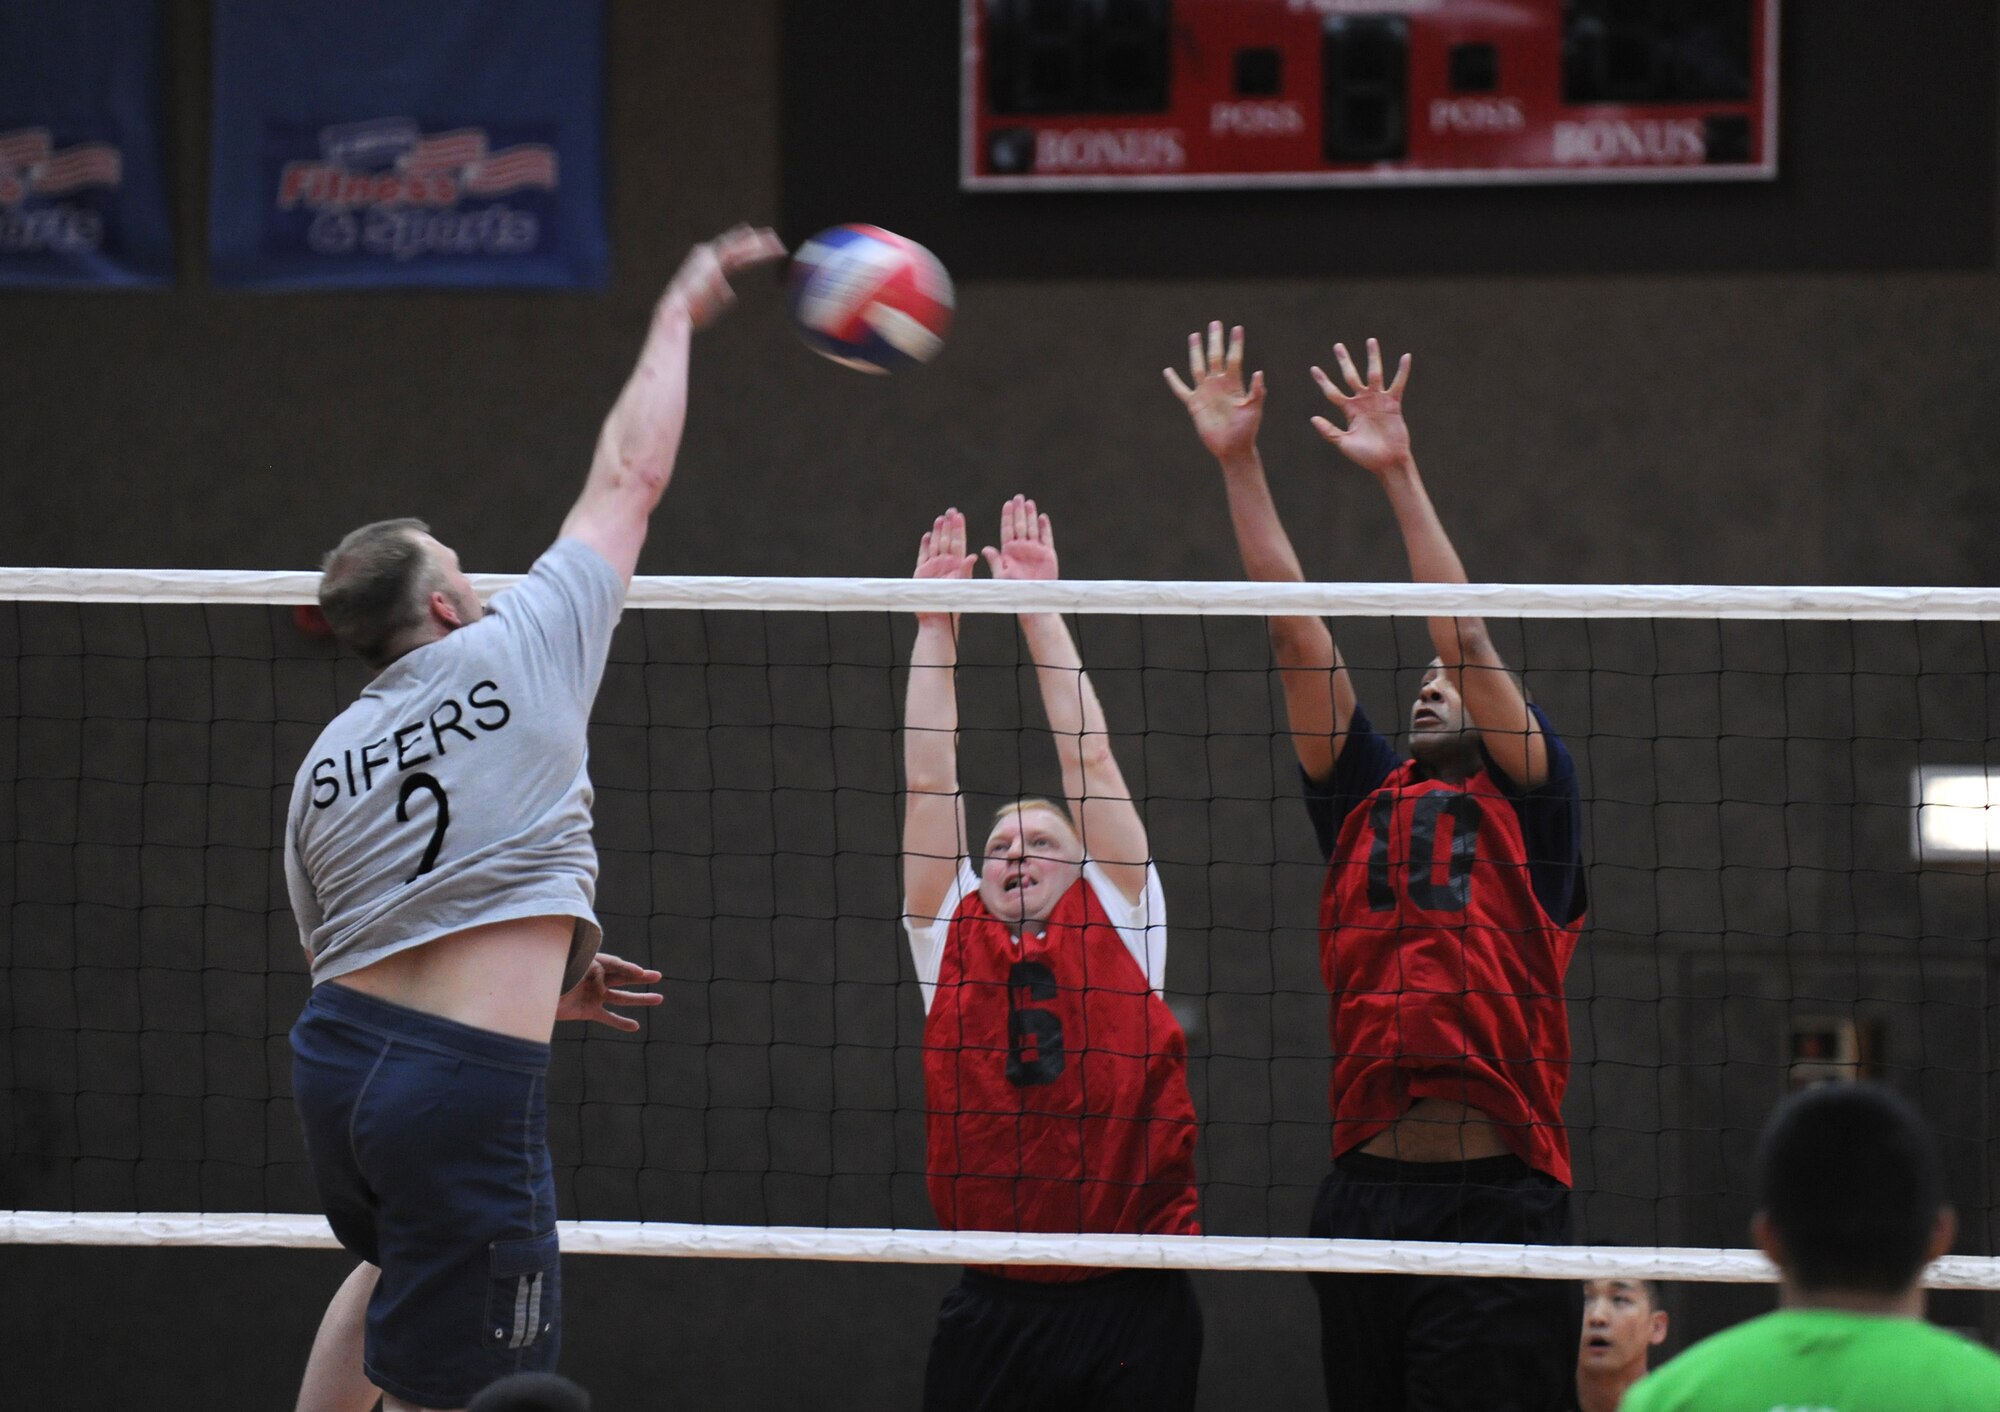 SPANGDAHLEM AIR BASE, Germany – Eric Sifers, 52nd Civil Engineer Squadron, spikes the ball as 52nd Medical Group defenders attempt to block the shot during the intramural volleyball championship series here May 9. The CES defeated MDG 25-16, 19-25, 15-10 to become the intramural volleyball champions. (U.S. Air Force photo/Senior Airman Nathanael Callon)